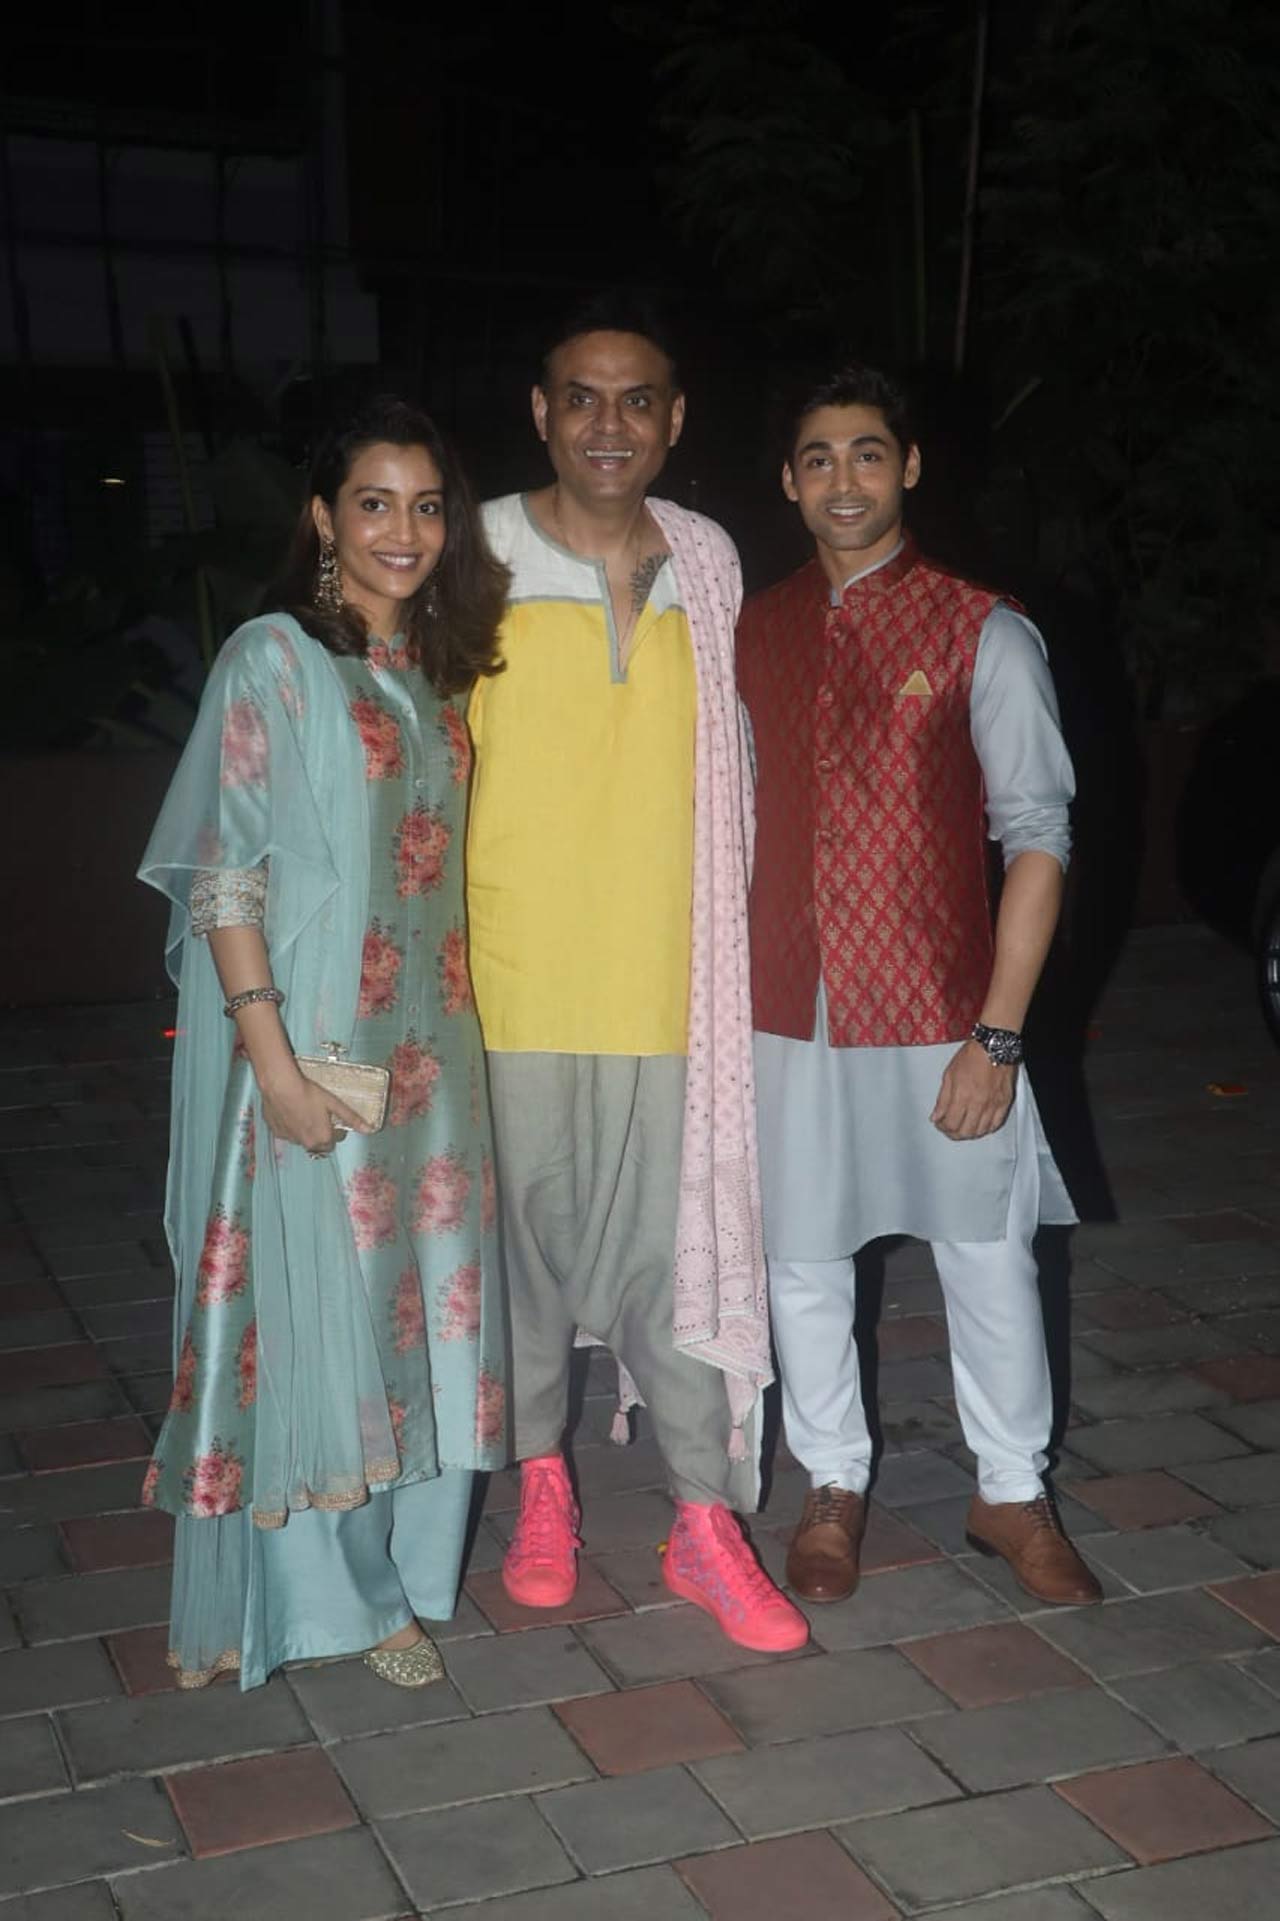 The host of the party Sandiip Sickand himself posed with Ruslan Mumtaz and his wife Nirali Mehta as the couple attended the Diwali party.